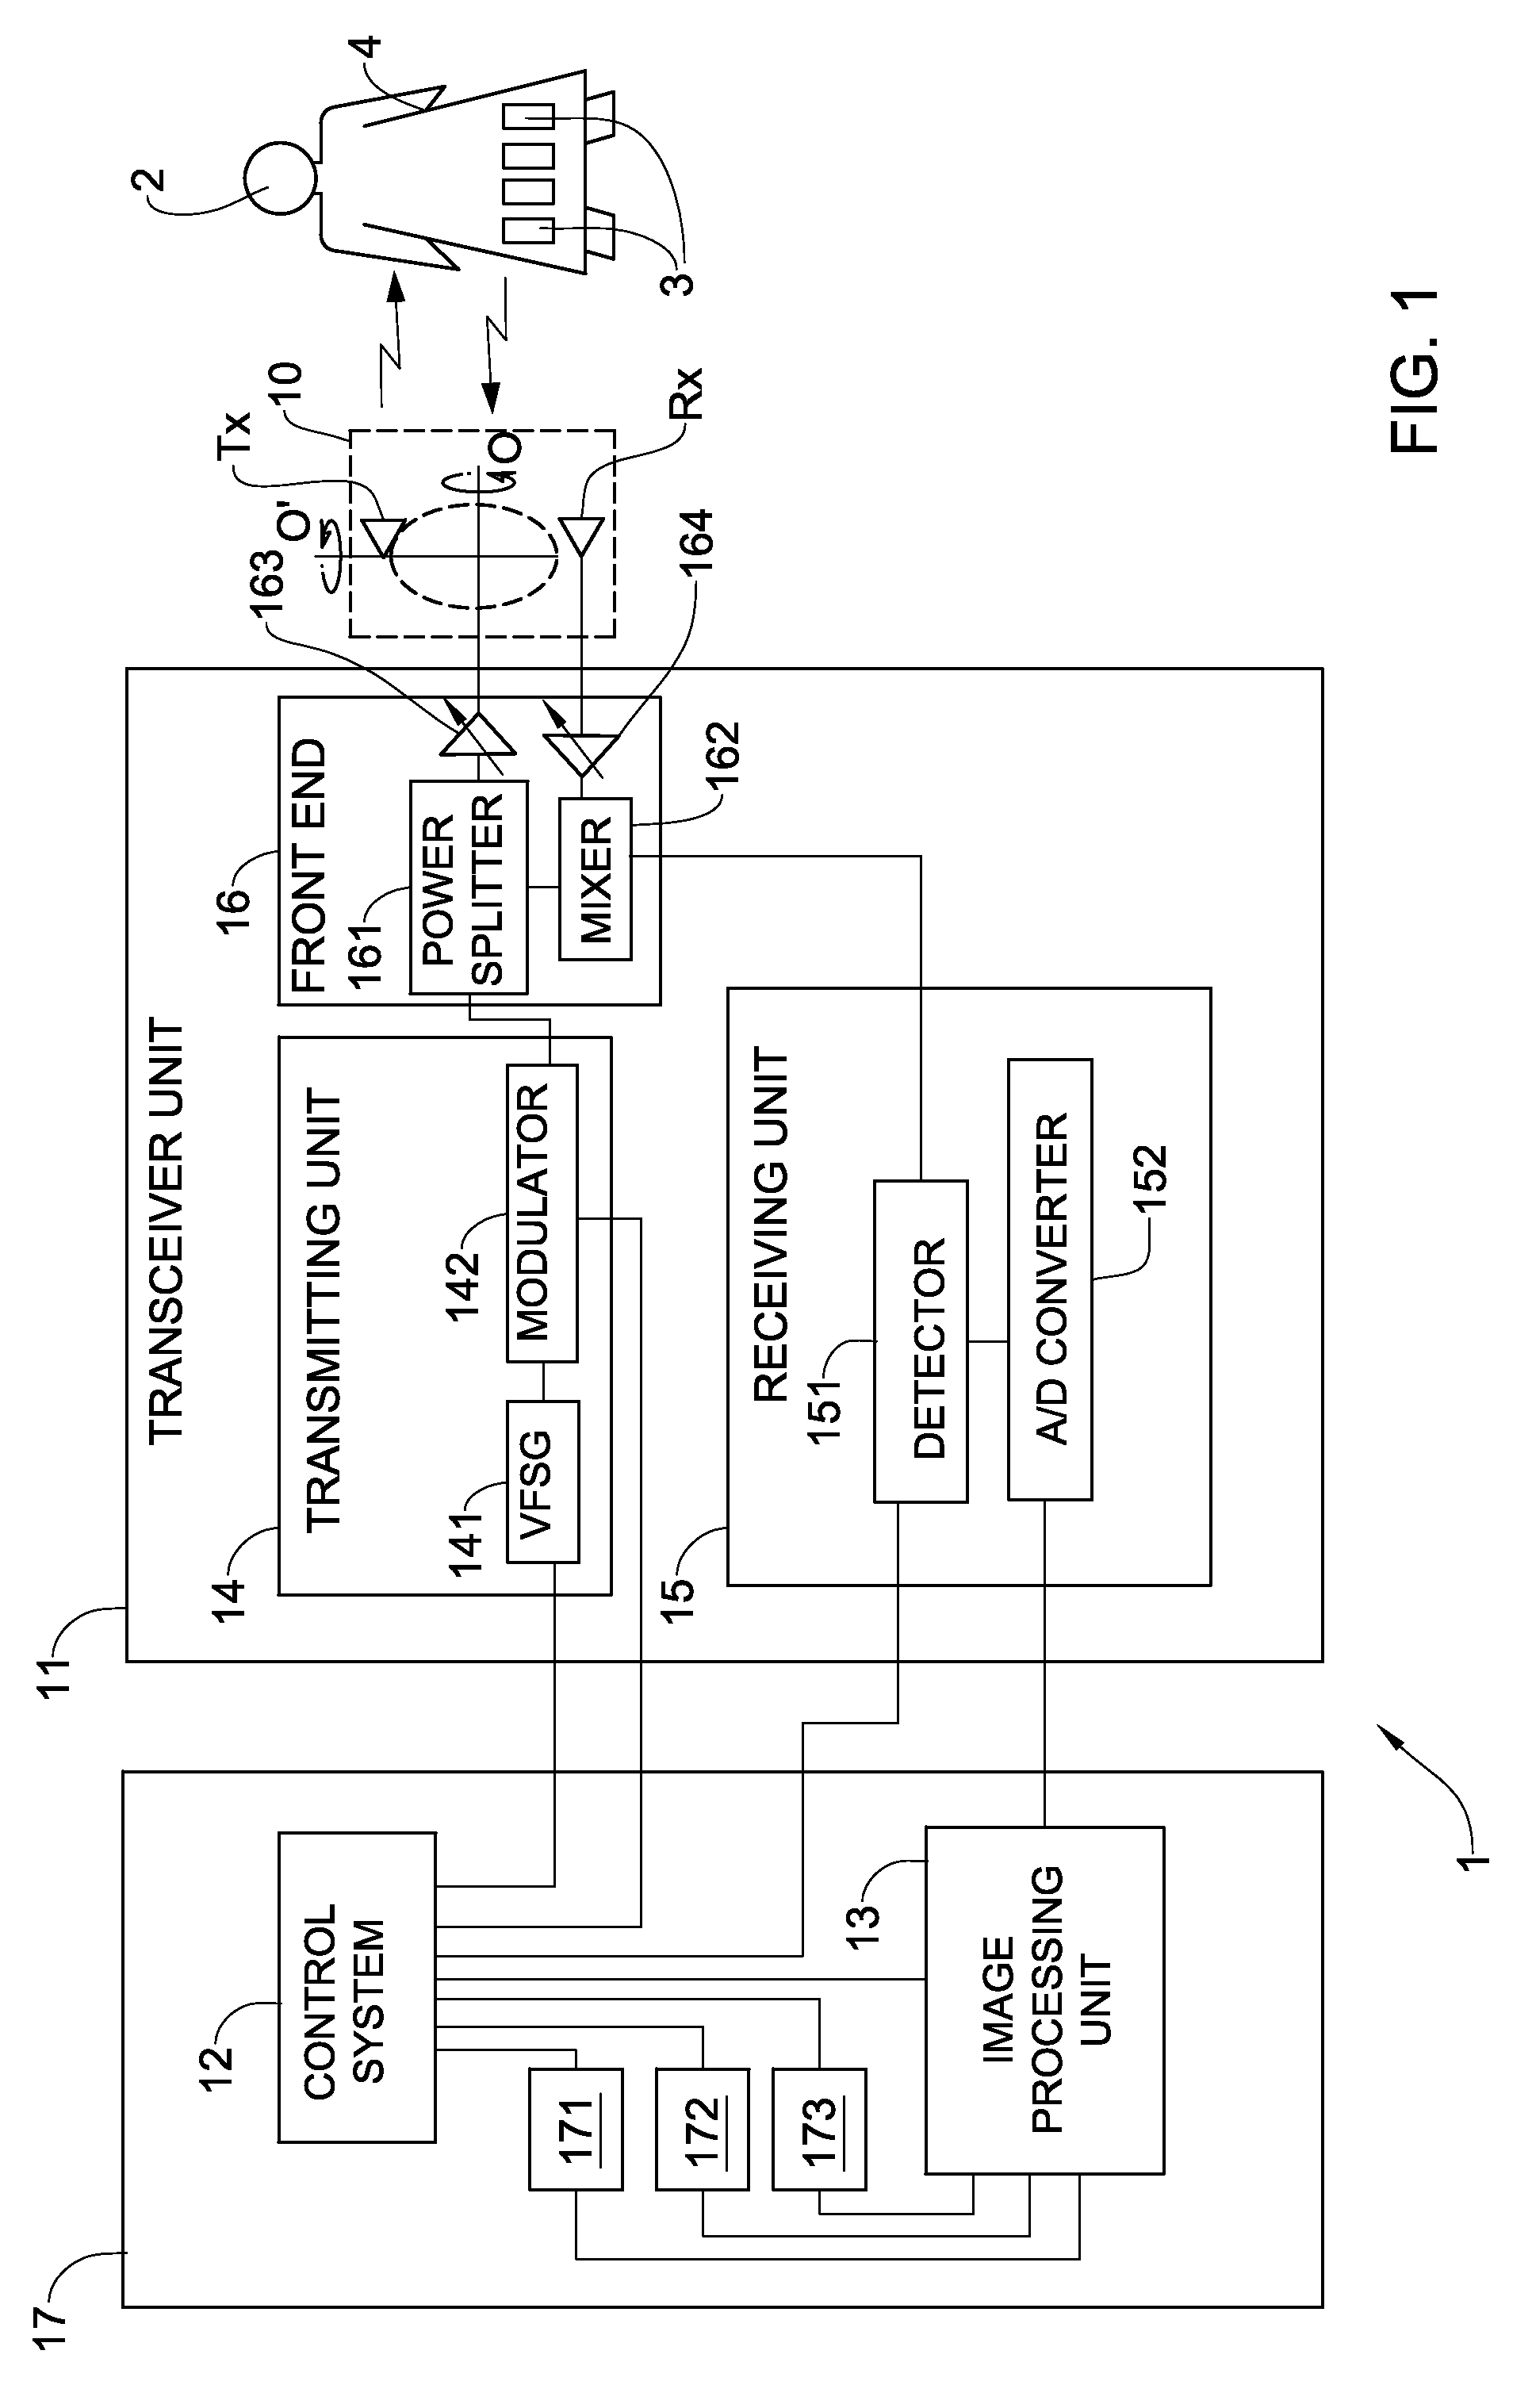 System and method for imaging objects